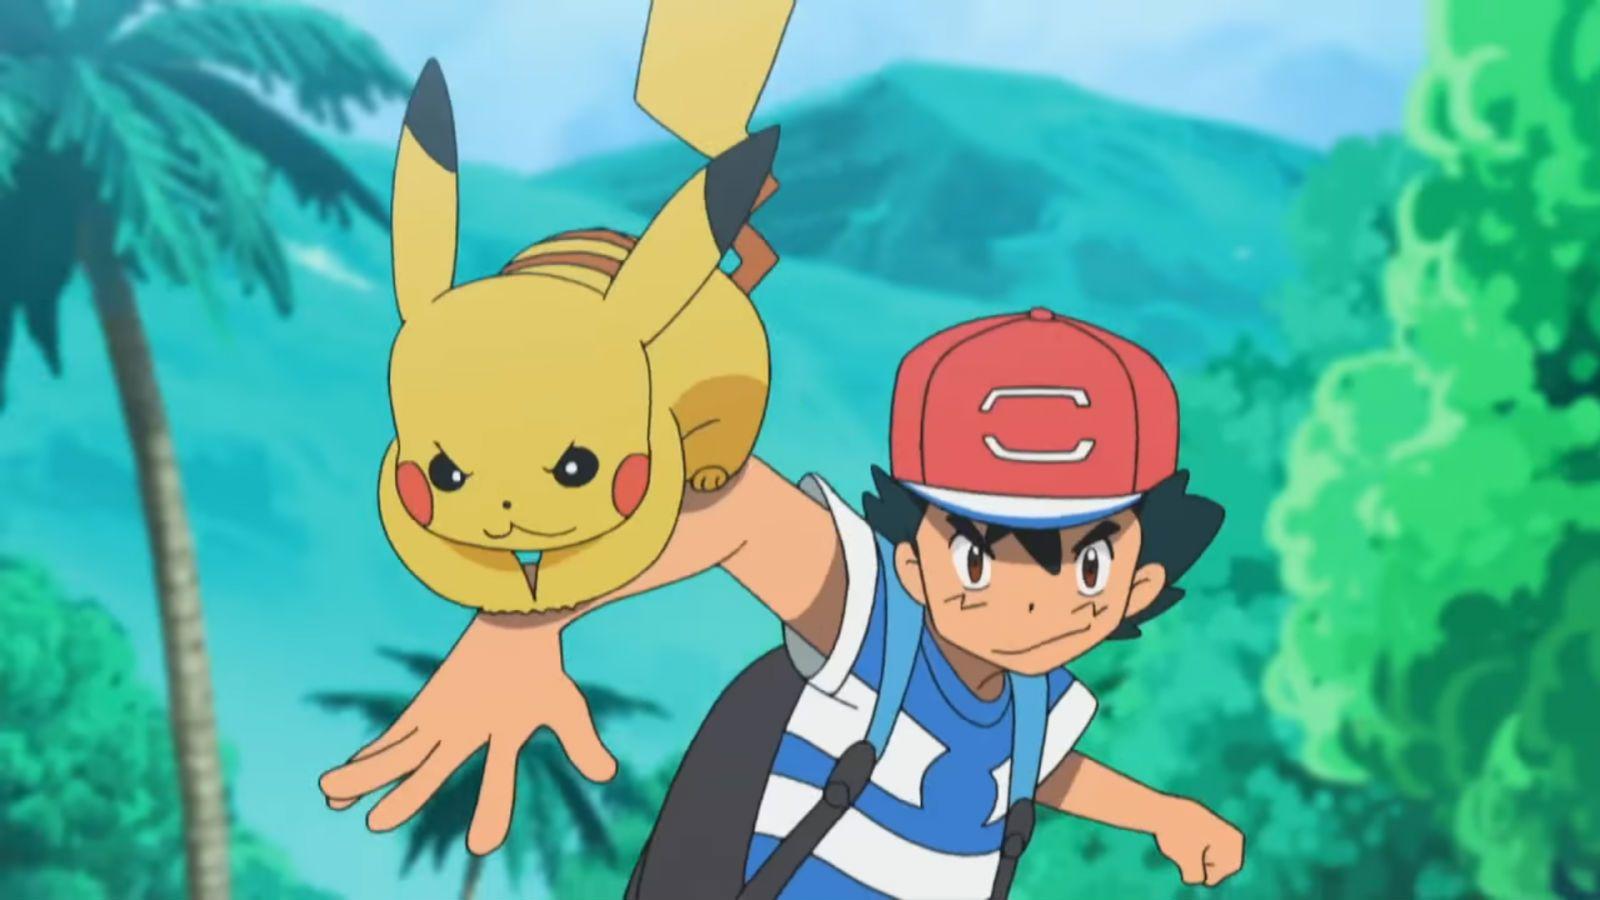 The ship has been set back on course when it comes to Pokemon Sun